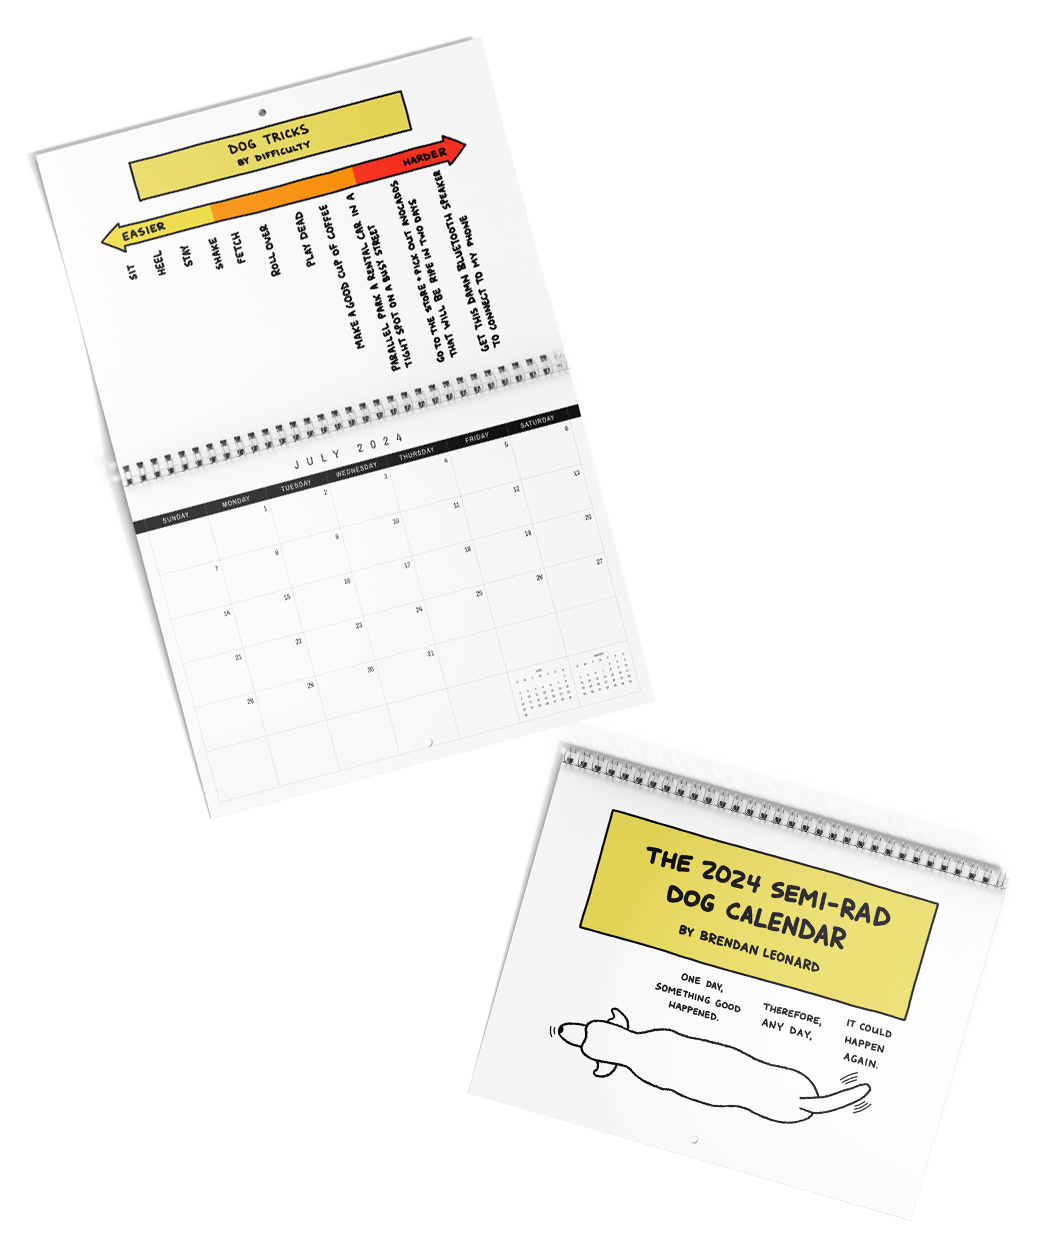 The 2024 Semi-Rad Dog Calendar with an illustration of a dog from above on the cover. The calendar is open to the month of July with a hand drawn graph. 